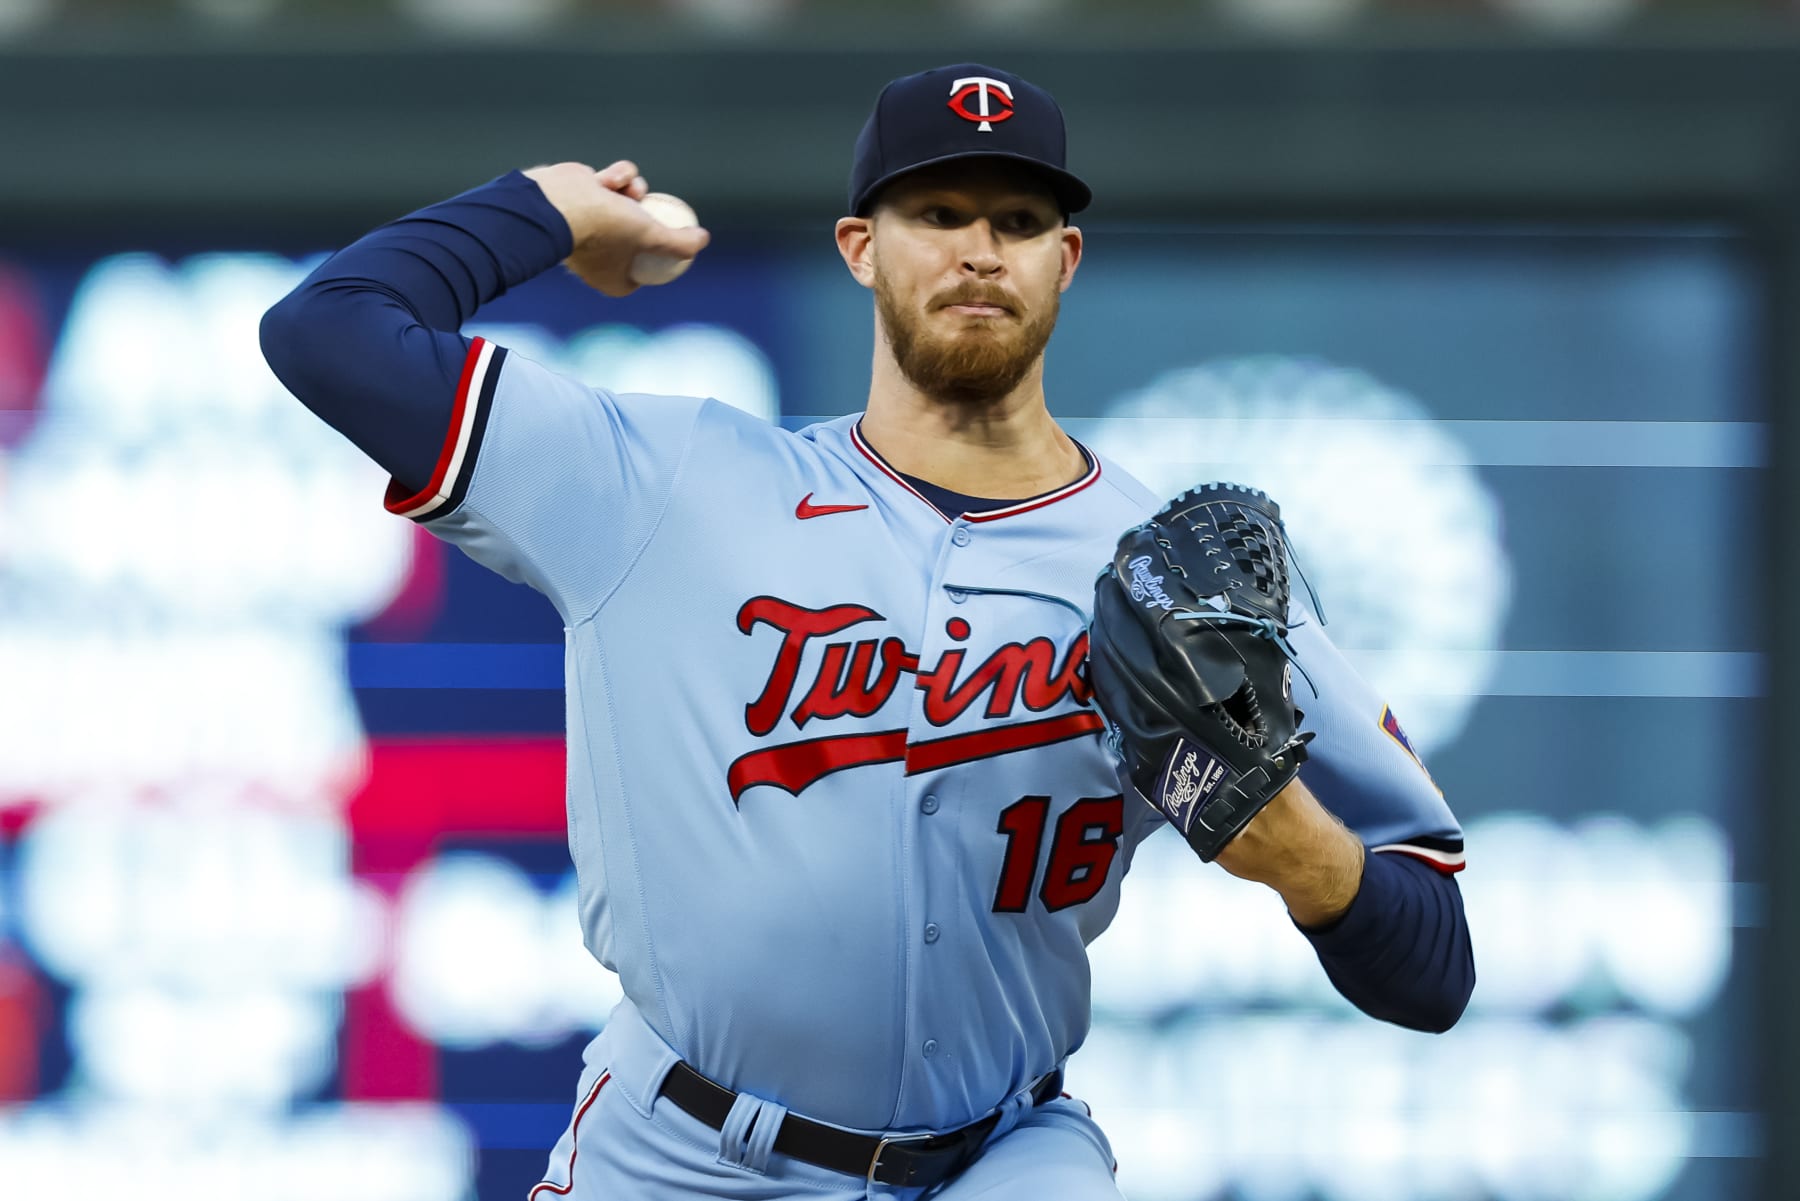 Hope roams in the Twins' outfield